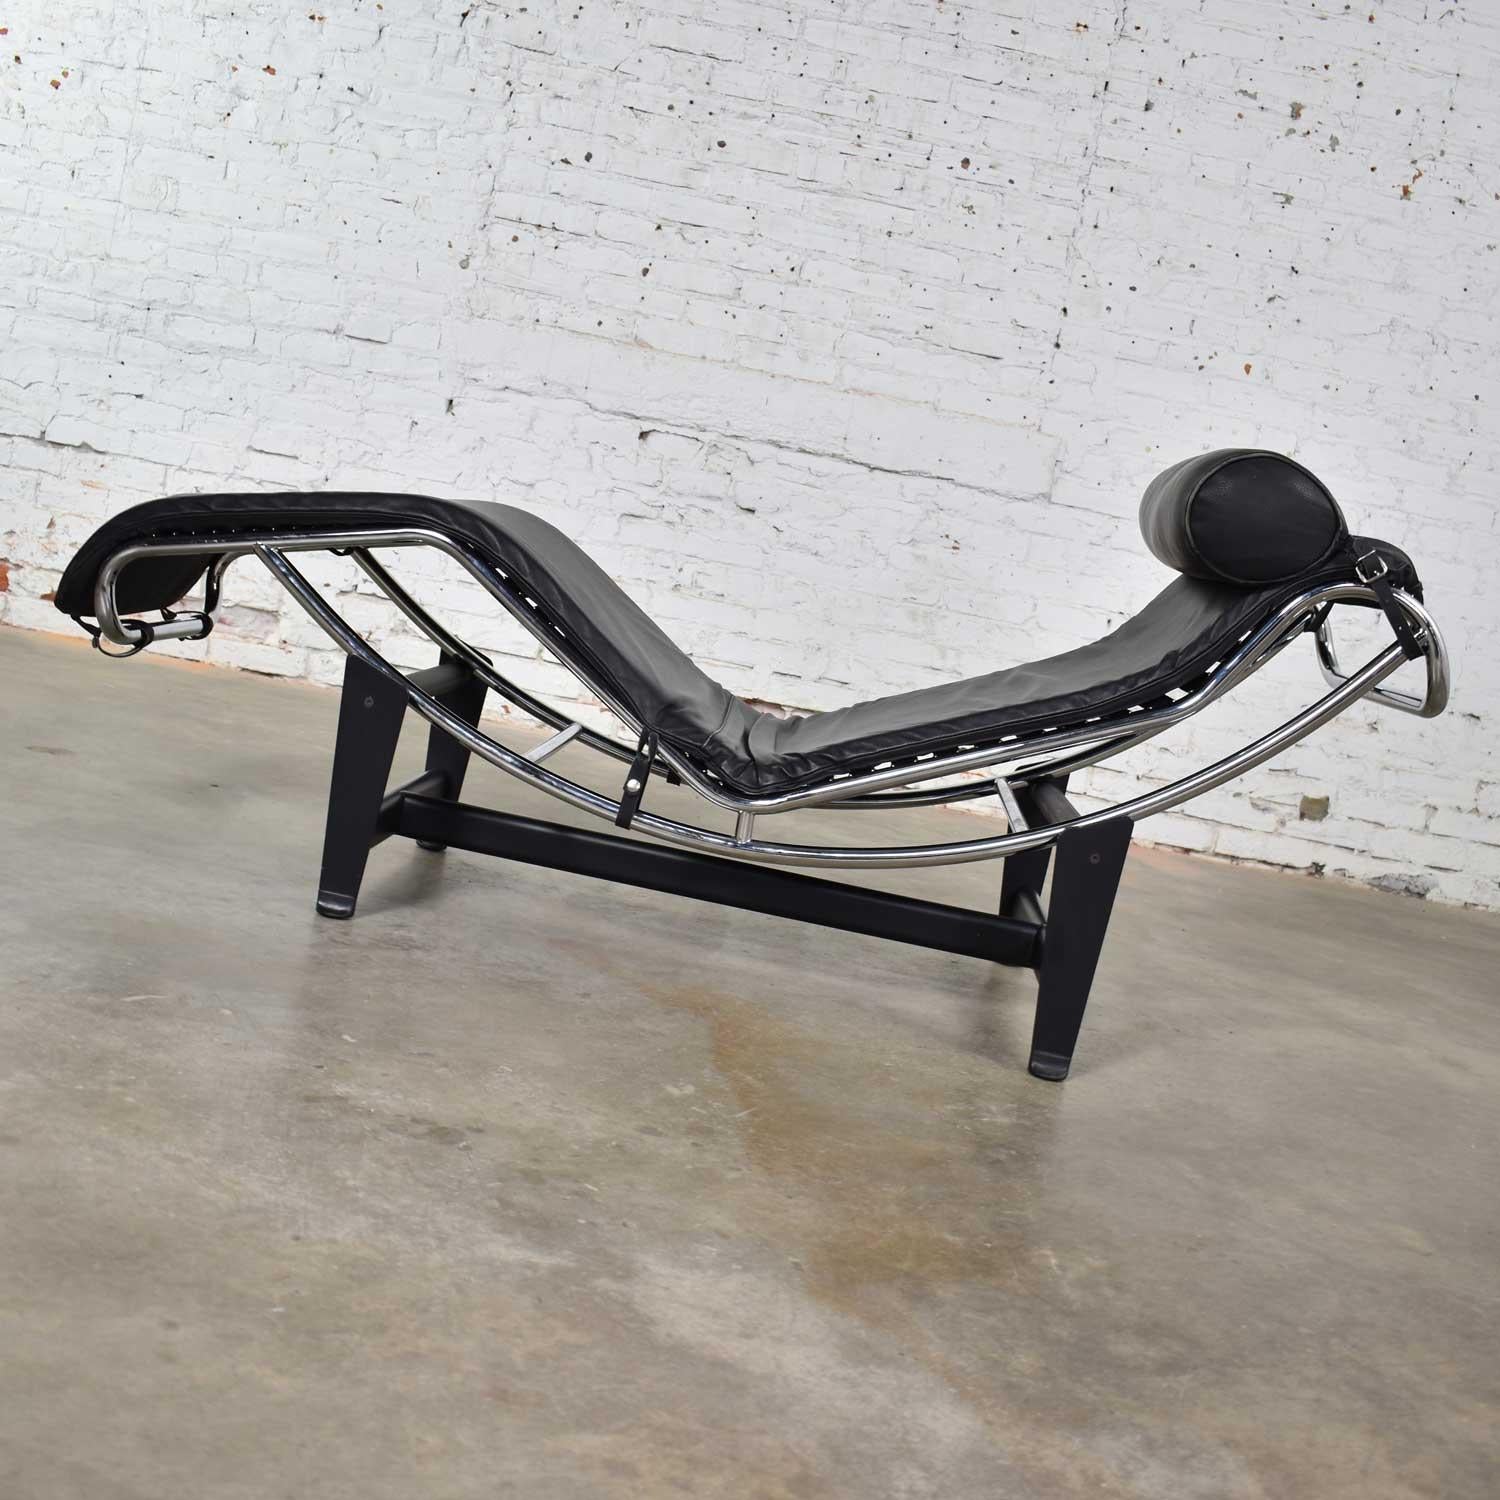 Wonderful Le Corbusier LC4 style chaise in chrome and black painted steel with black leather cushion and head support. This example is by an unknown maker. It is in fabulous vintage condition. It does have a couple worn spots in the ribbed rubber